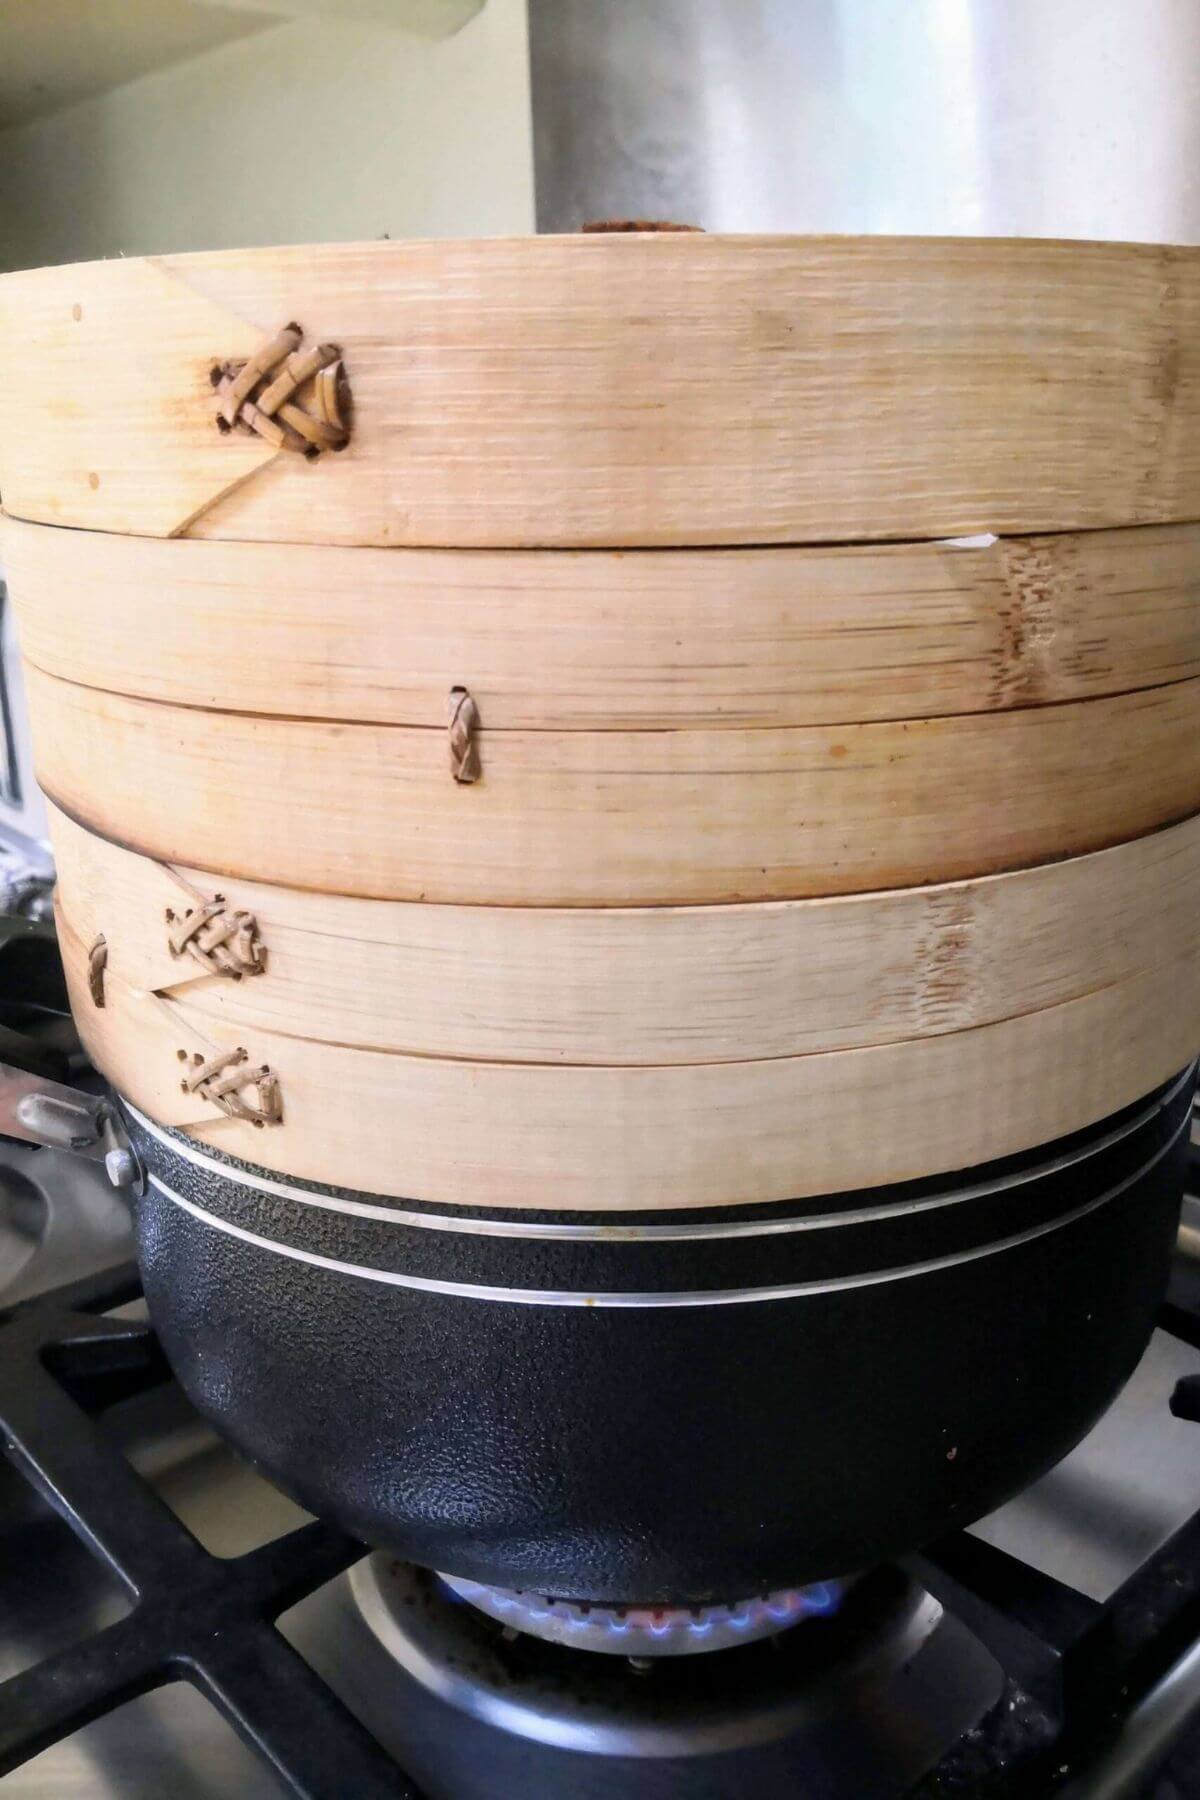 Bamboo steamer sitting on top of a large black pot.